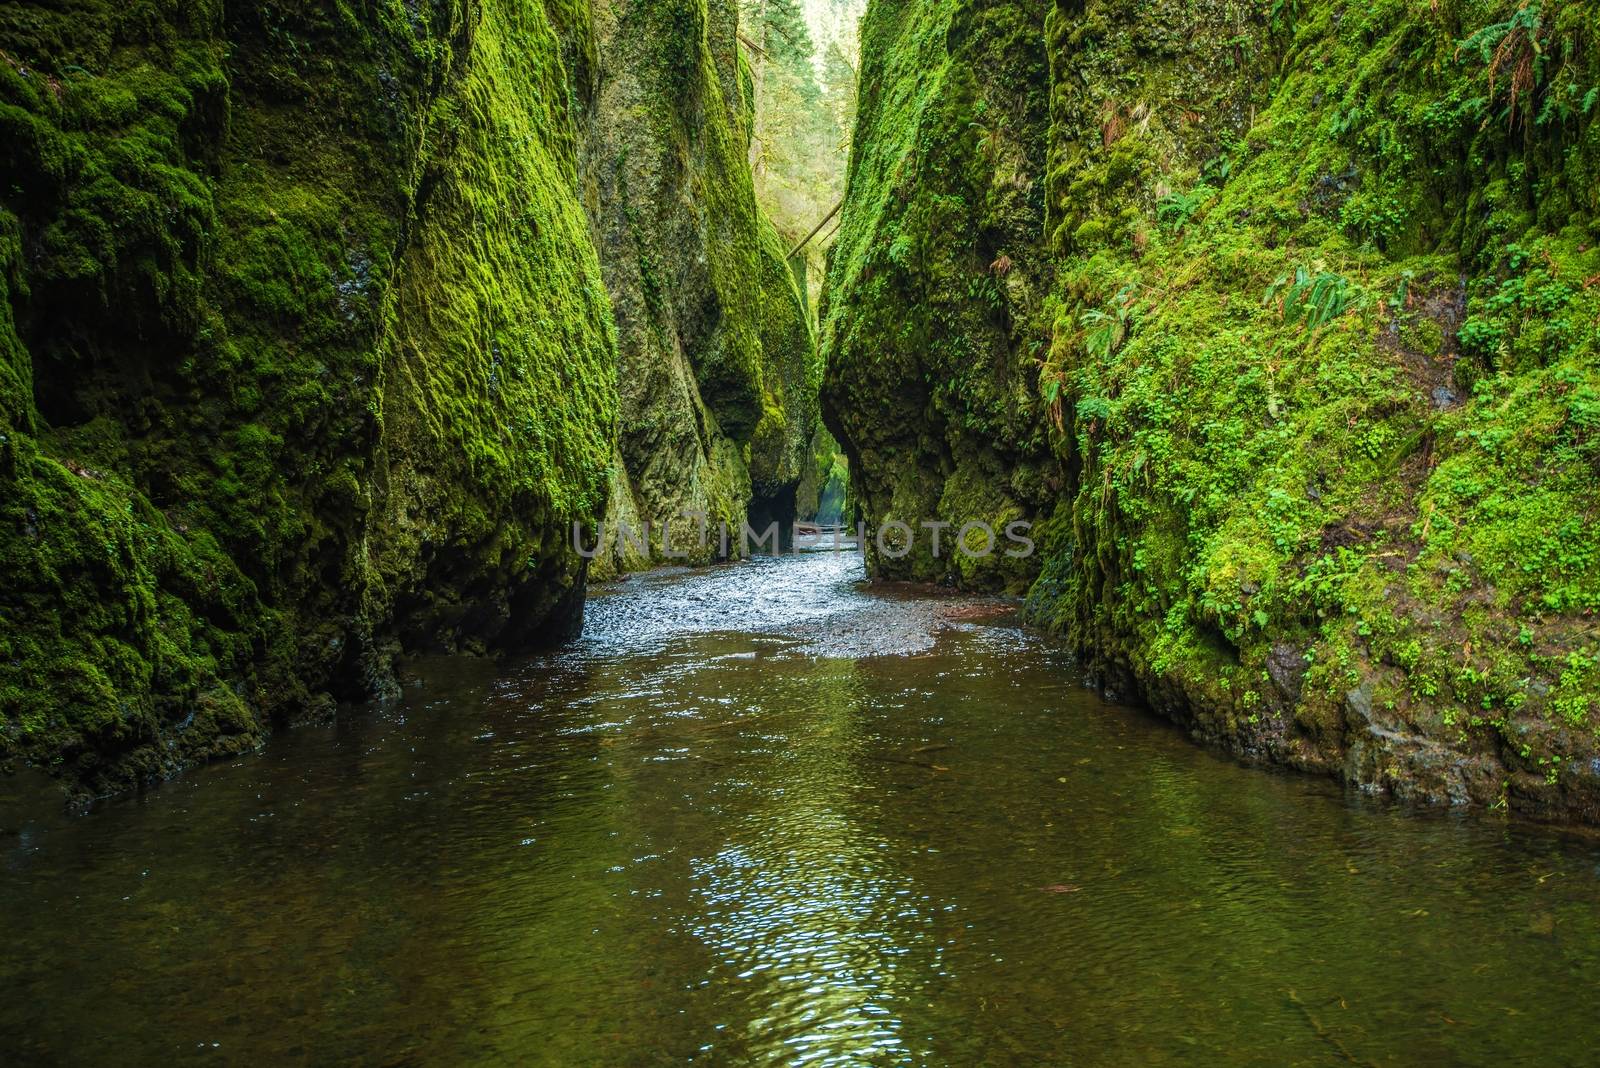 Mossy Scenic Oneonta Gorge in Oregon, United States.